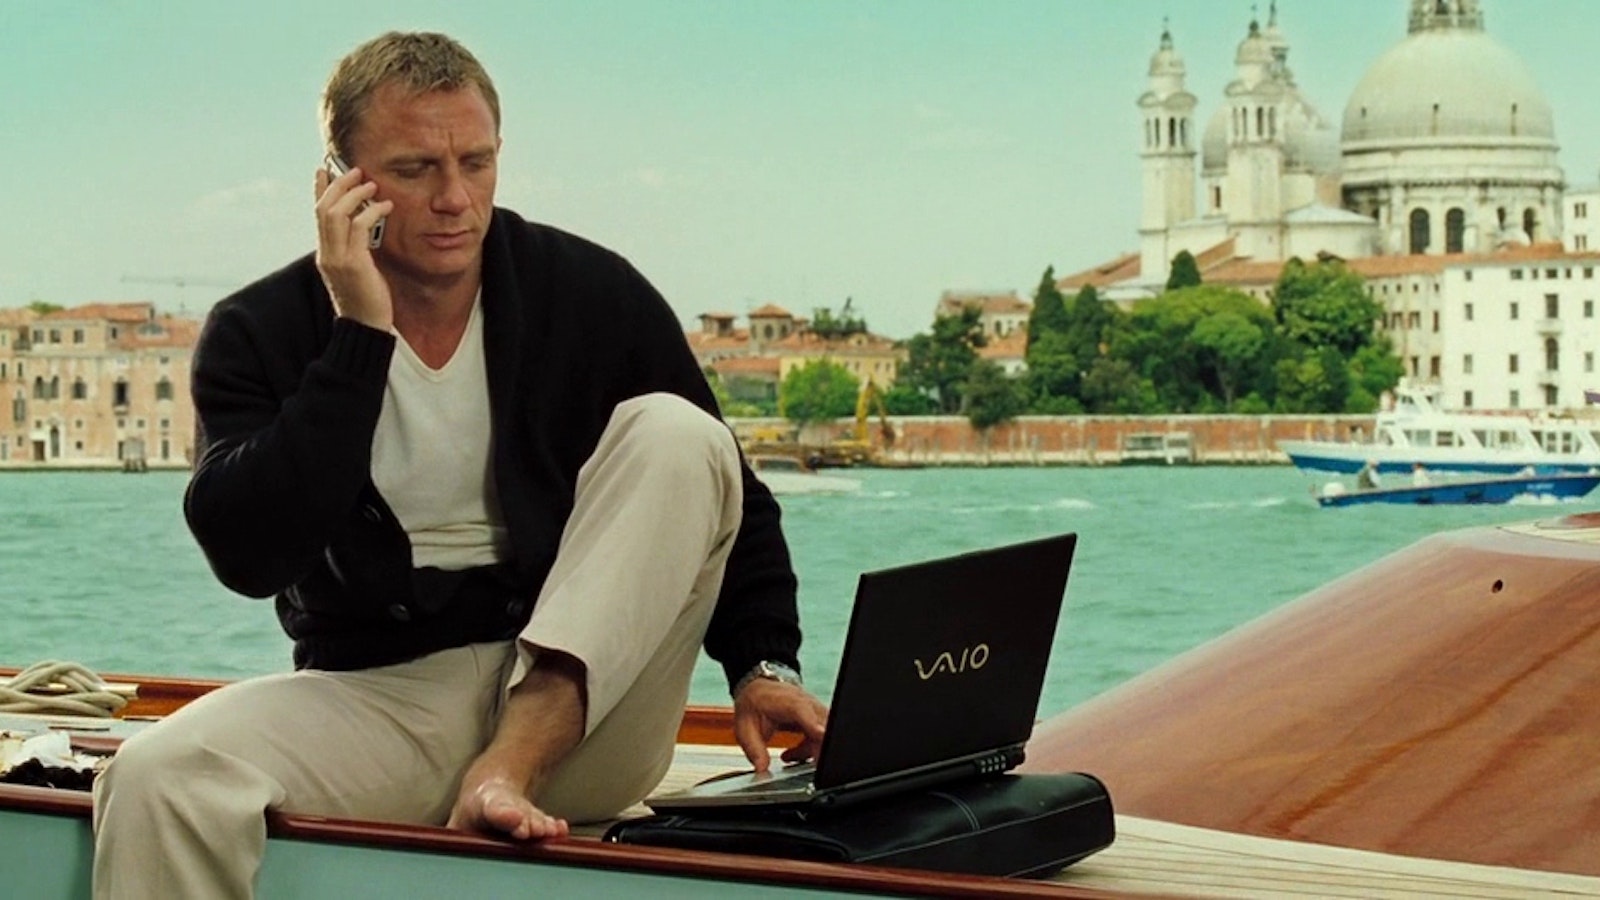 Casino Royale - Now Playing In Theater at Metrograph